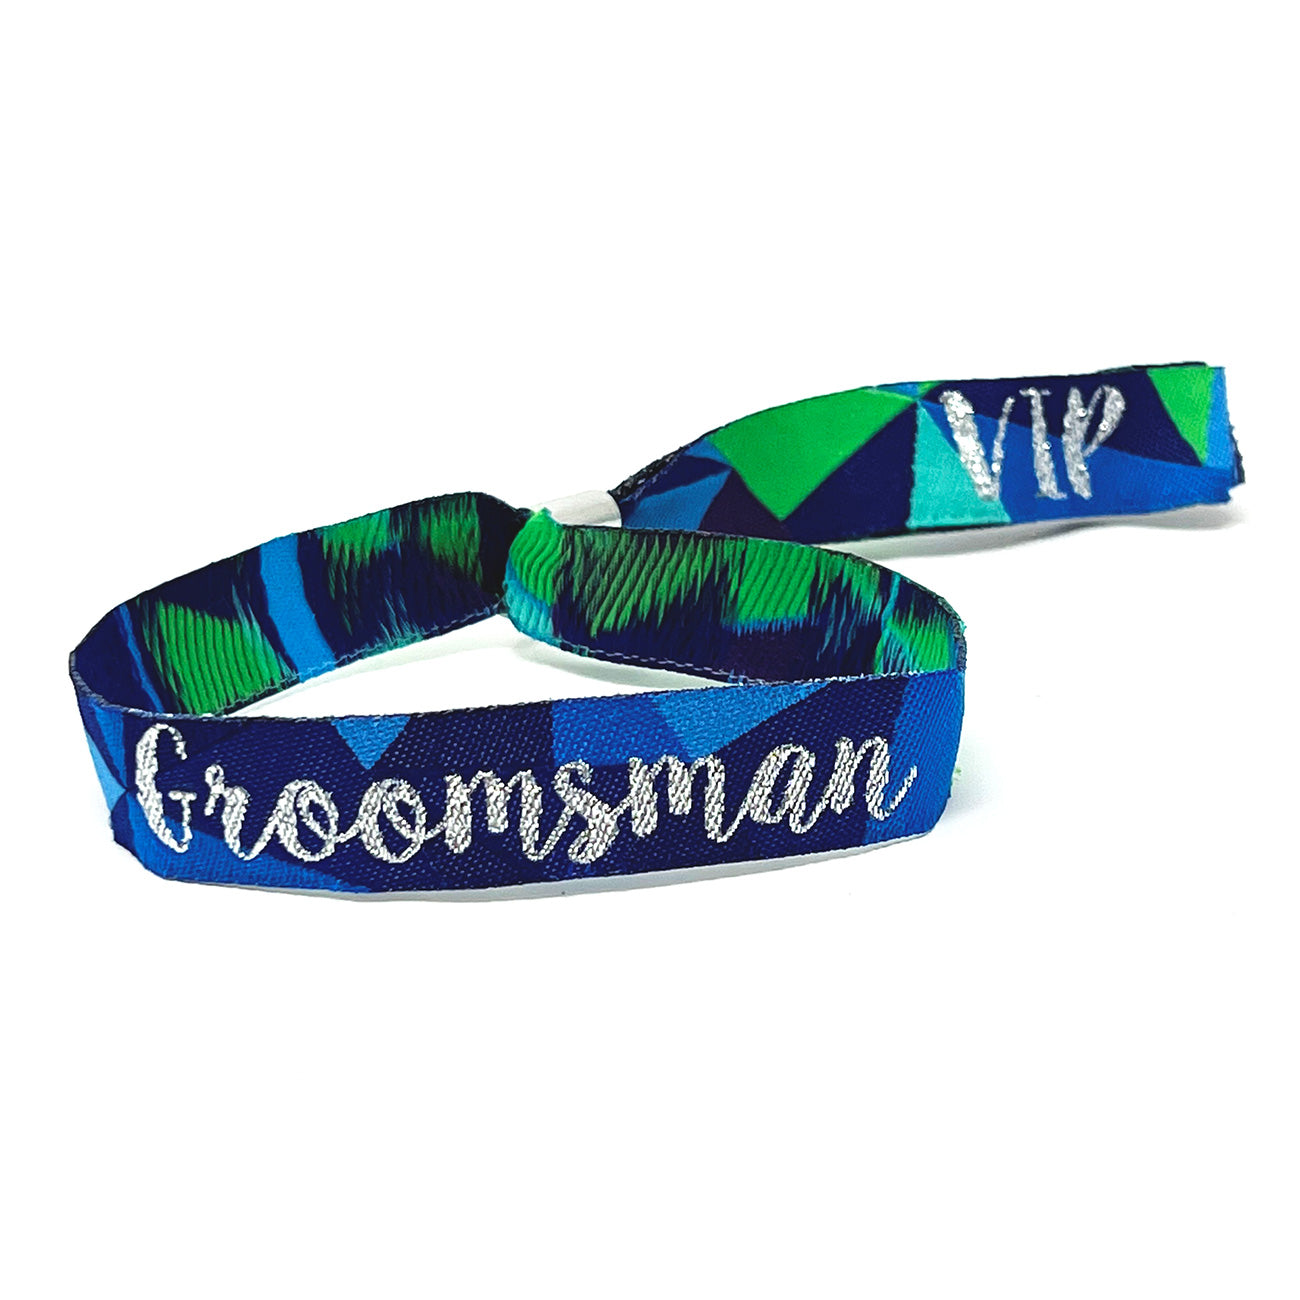 groomsman team groom stag party wristband